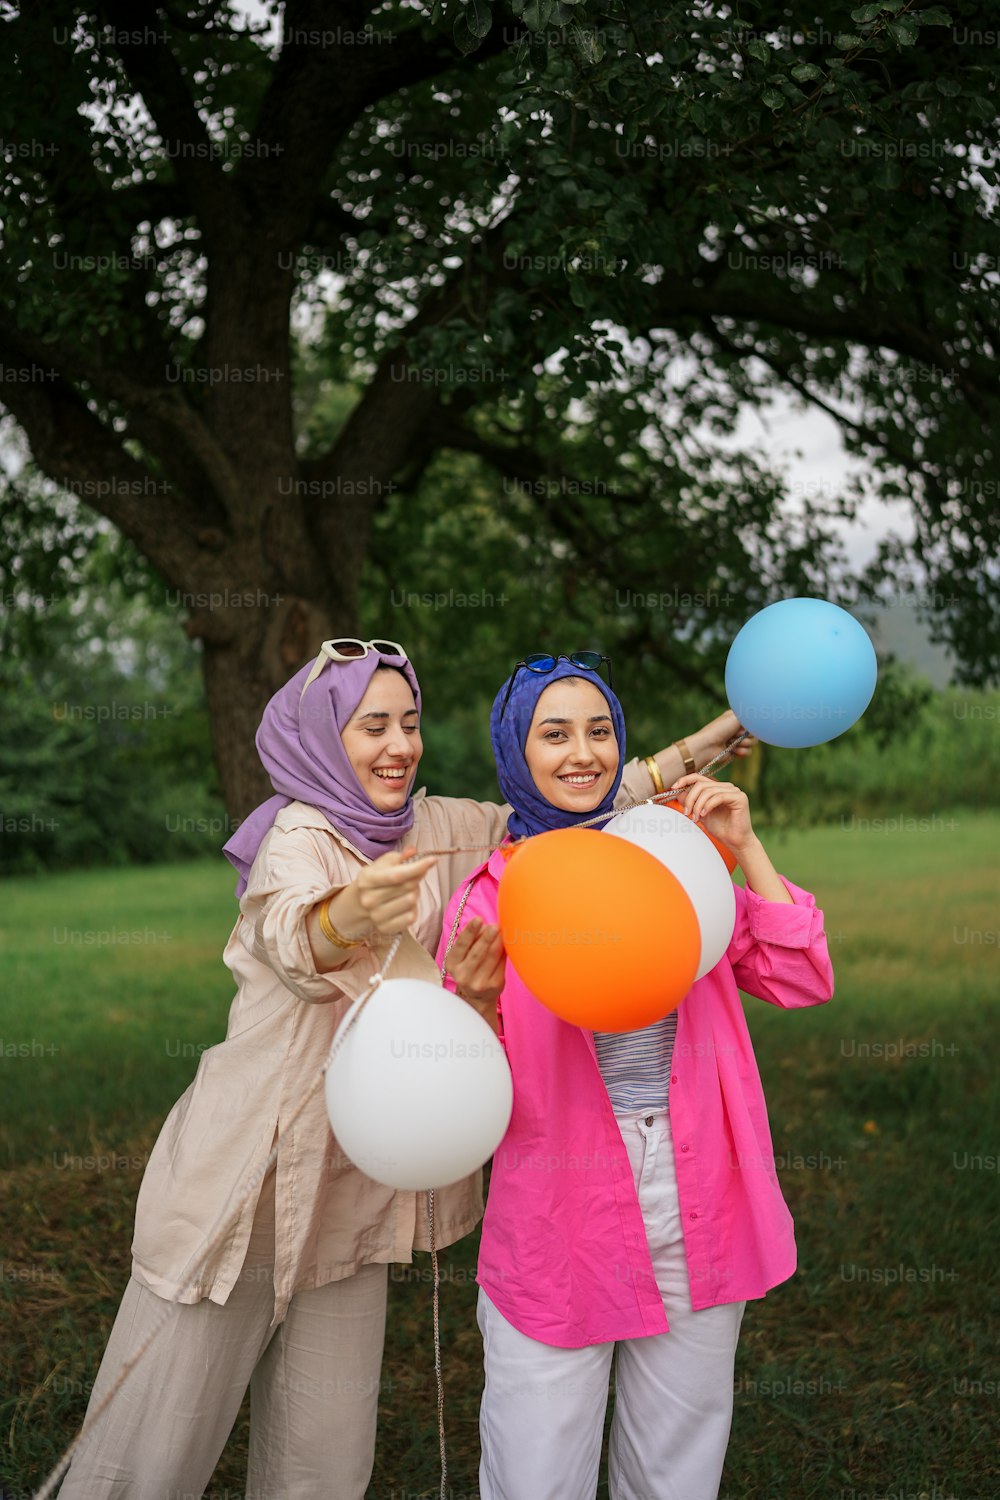 two women in hijabs are holding balloons